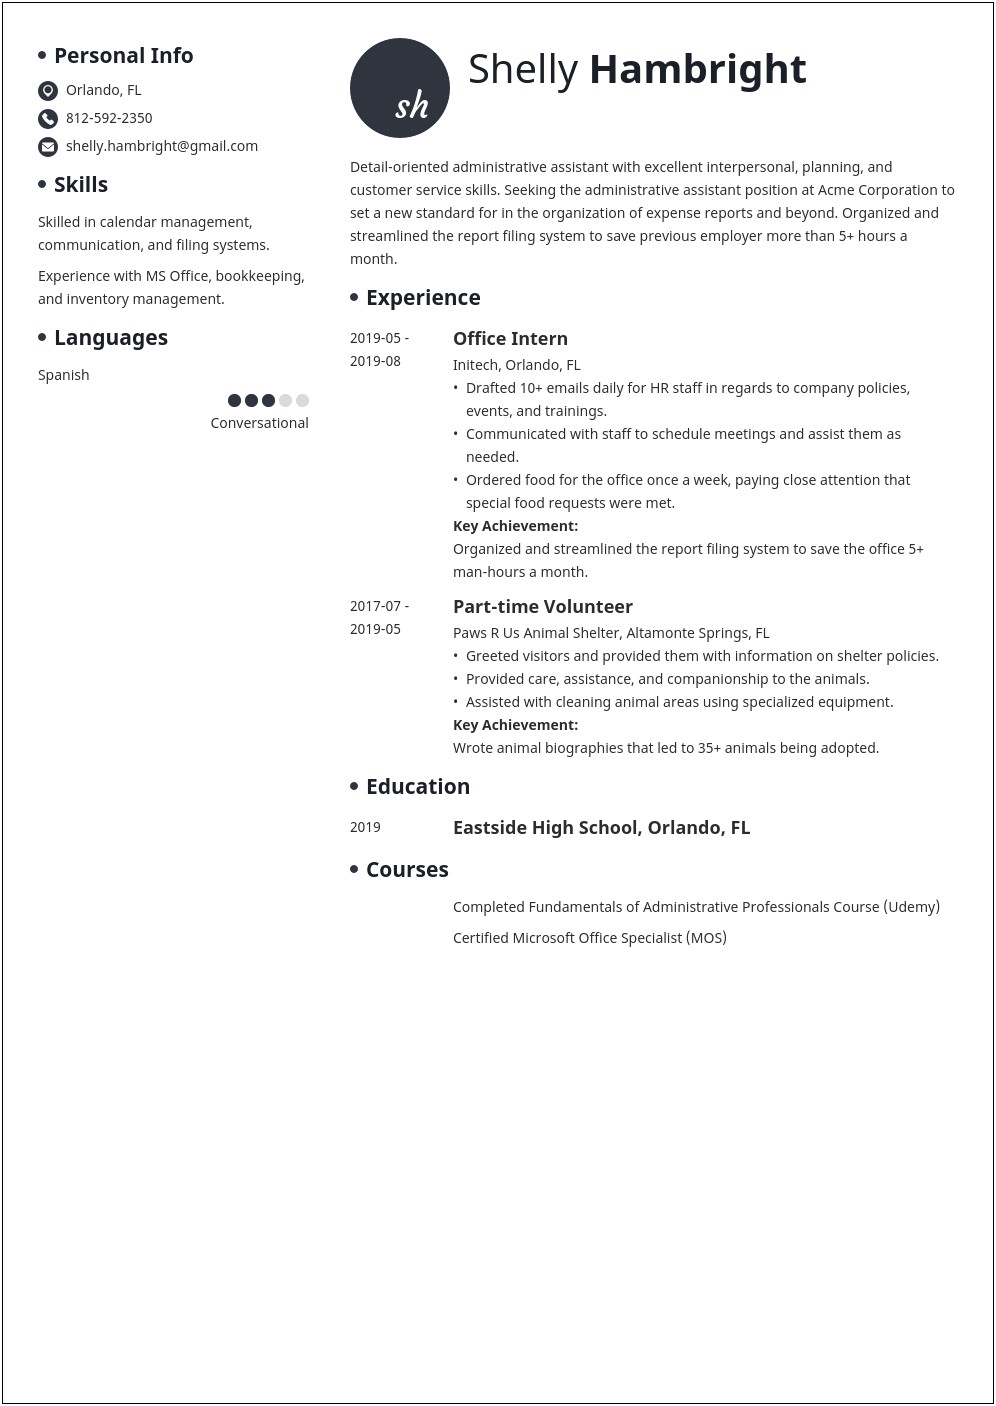 Sample Resume For Secretary Without Experience